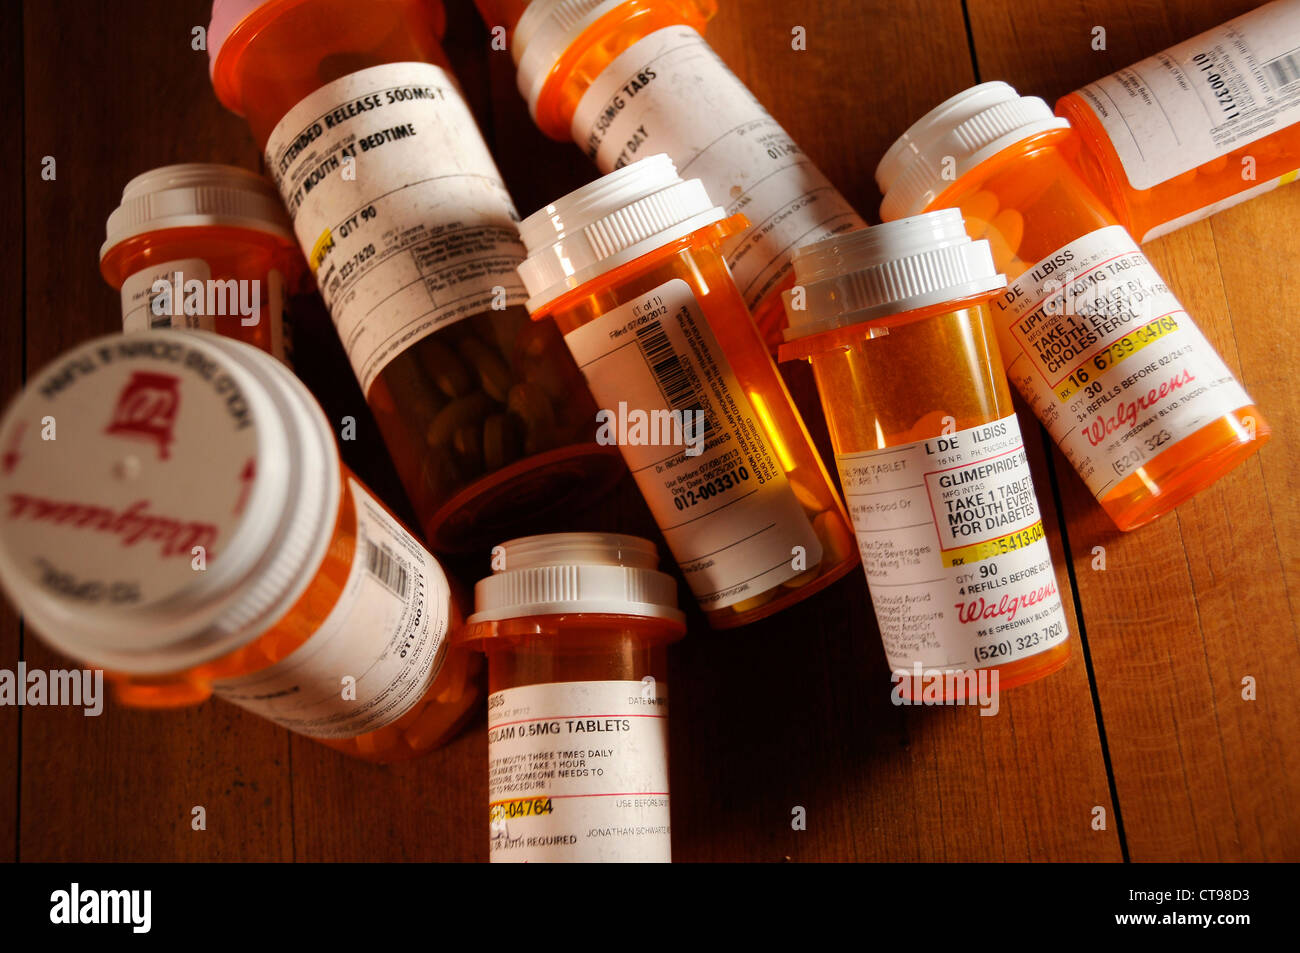 Medications taken by a patient with chronic illness. Stock Photo